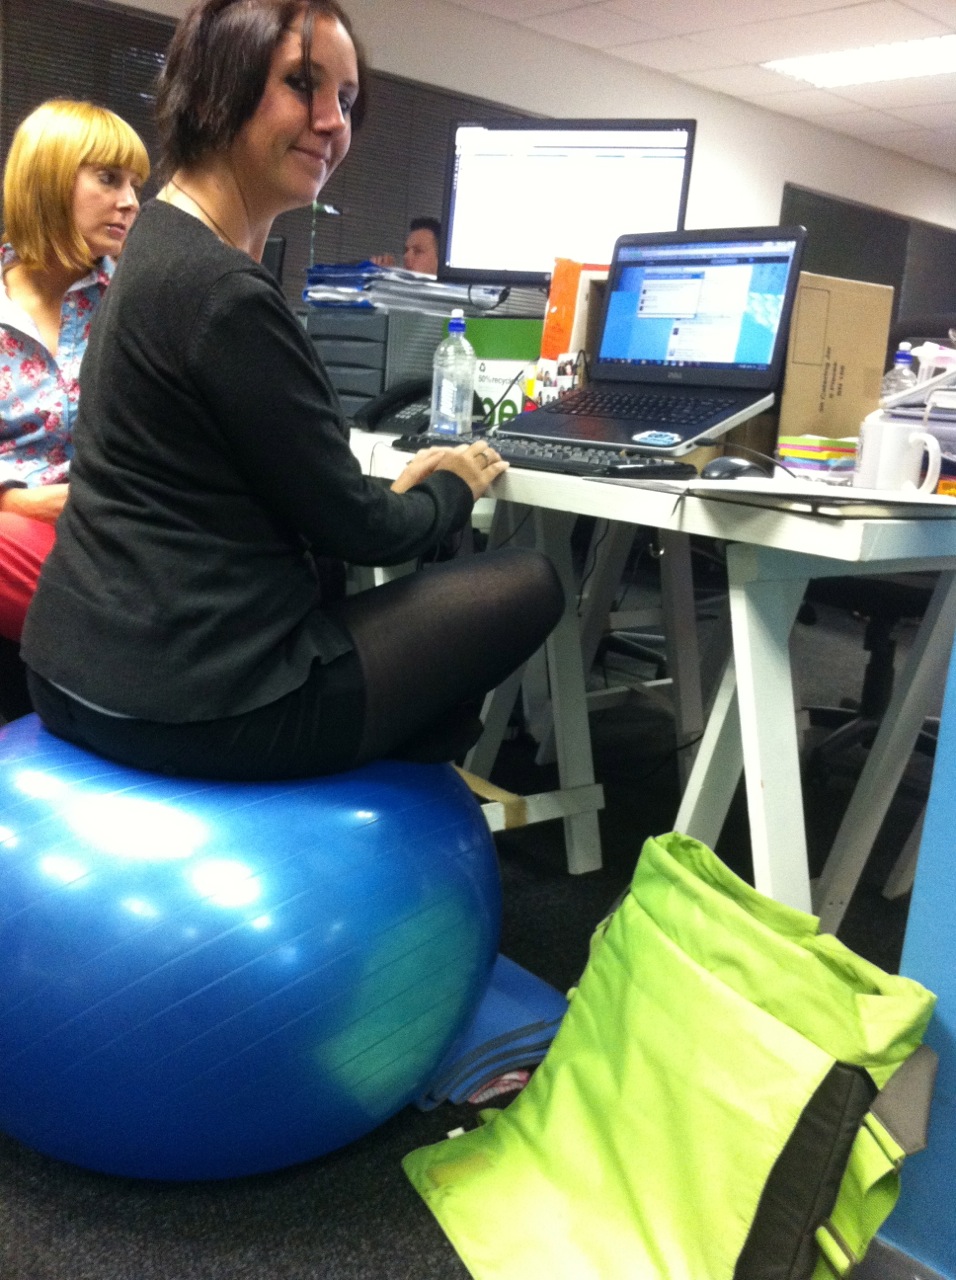 office exercise ball